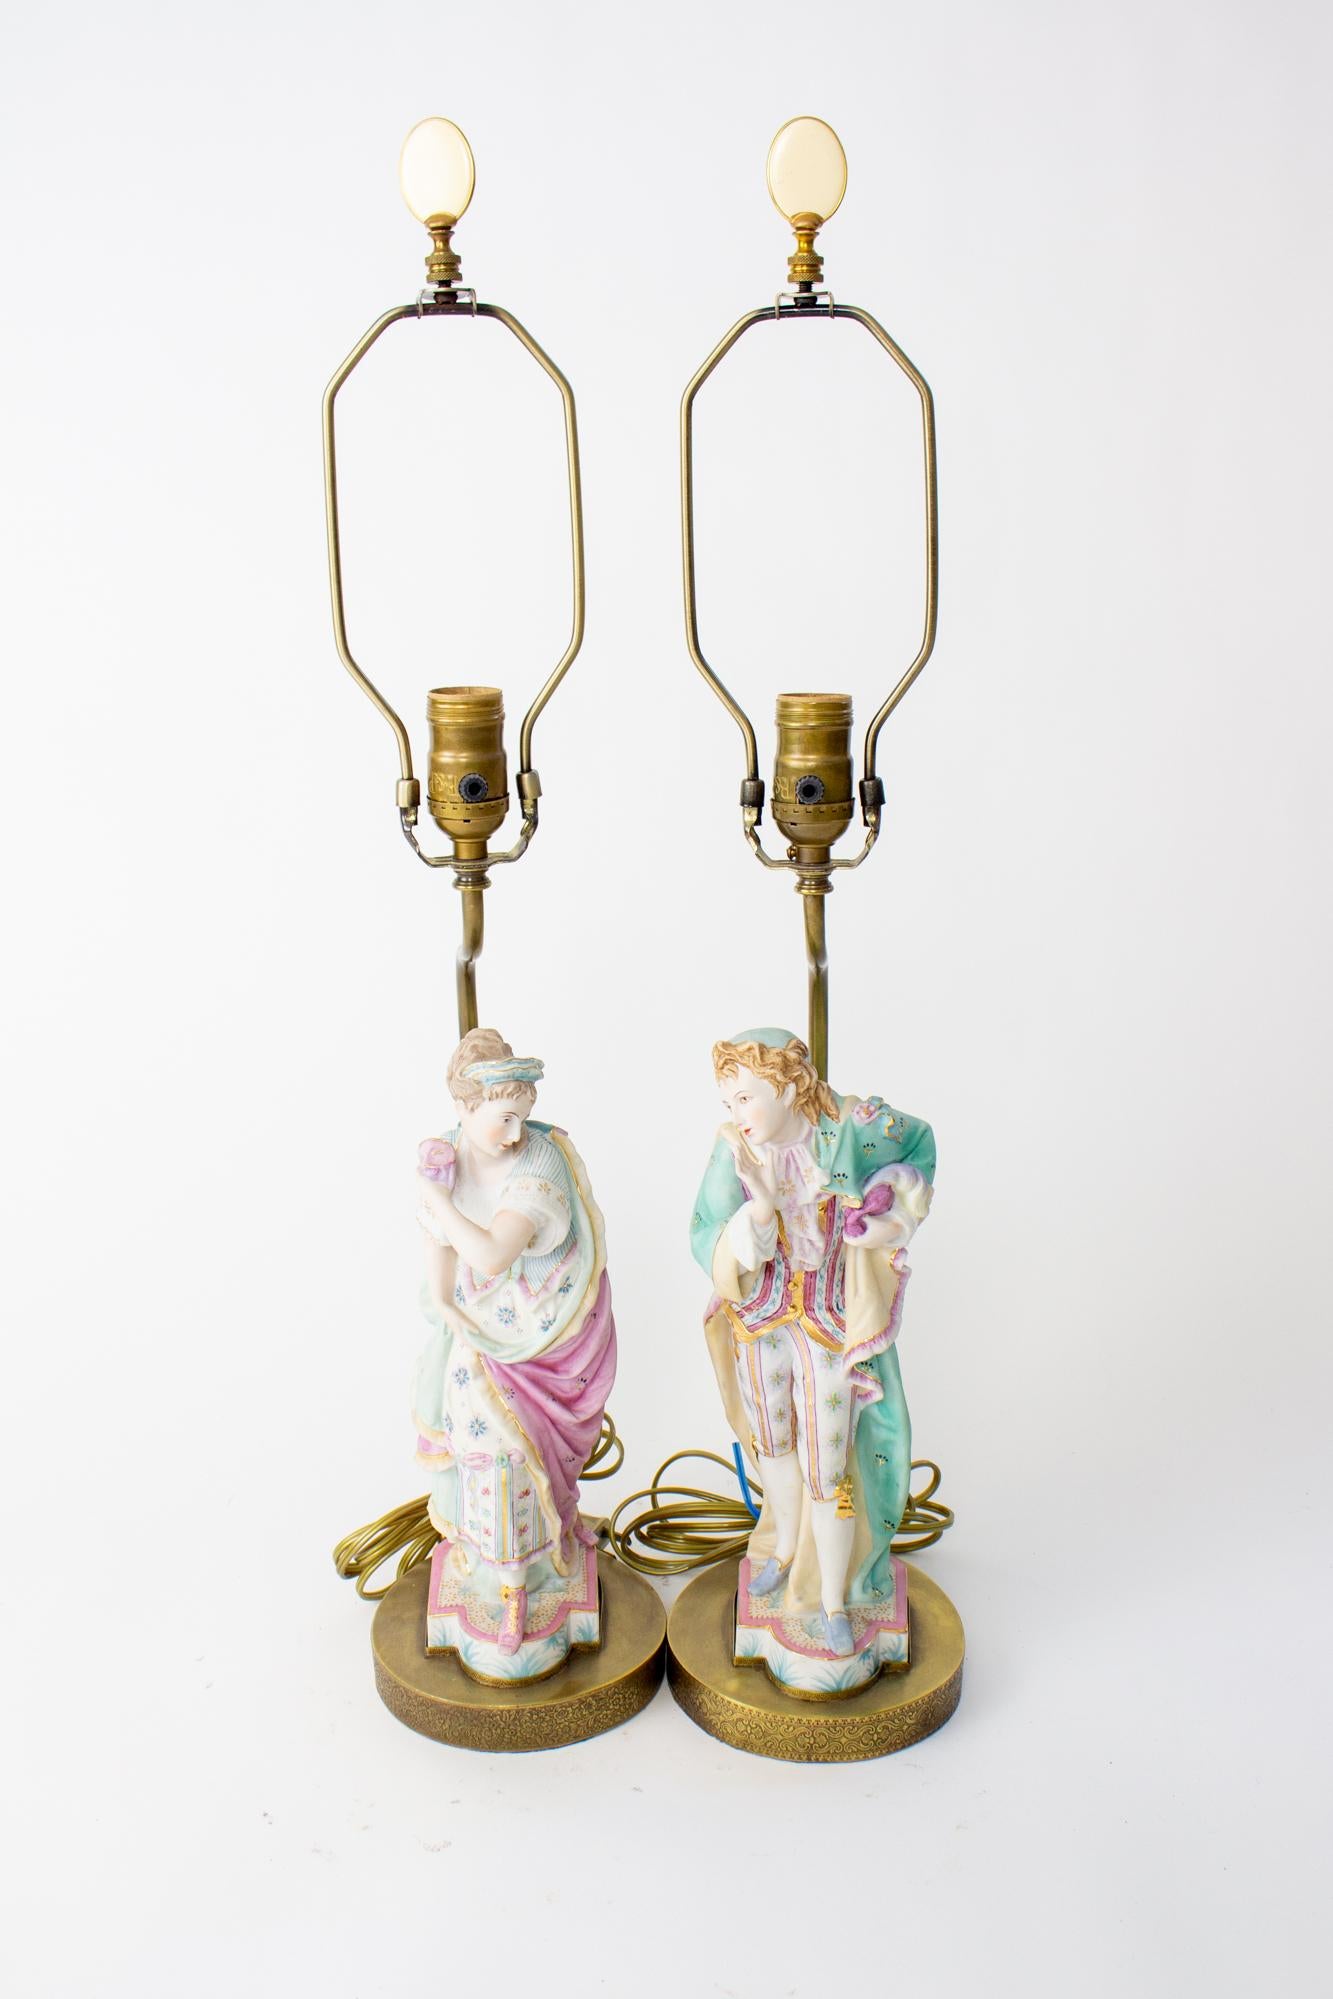 Mid 20th Century Masquerade Bisque Figurine Lamps - a Pair For Sale 3